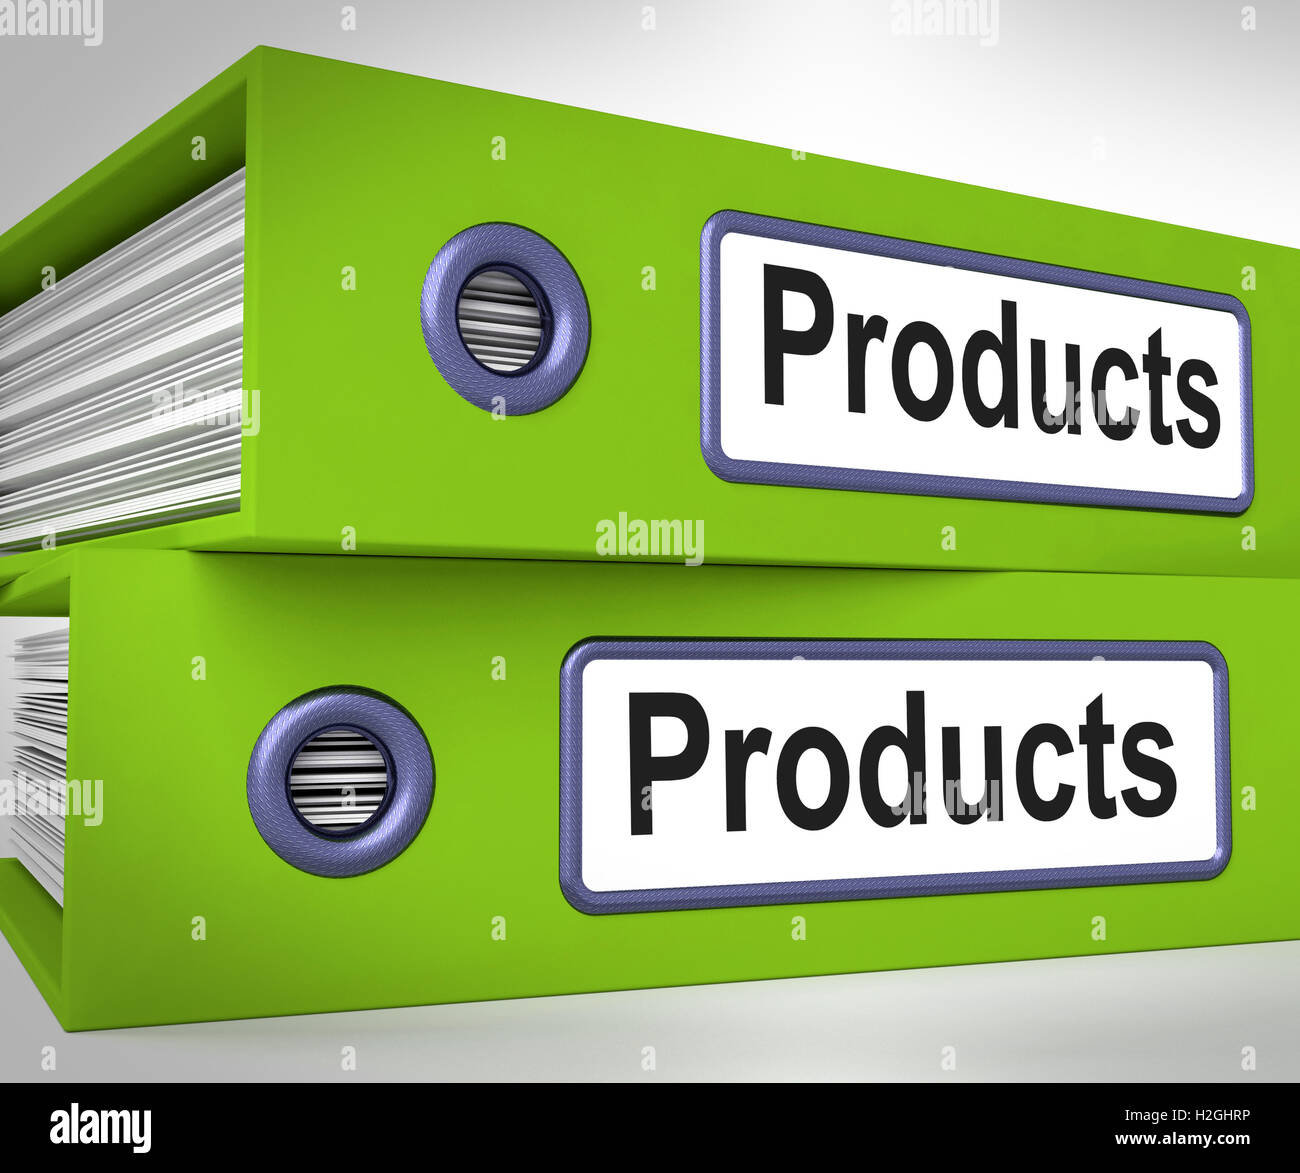 Products Folders Mean Goods And Merchandise For Sale Stock Photo